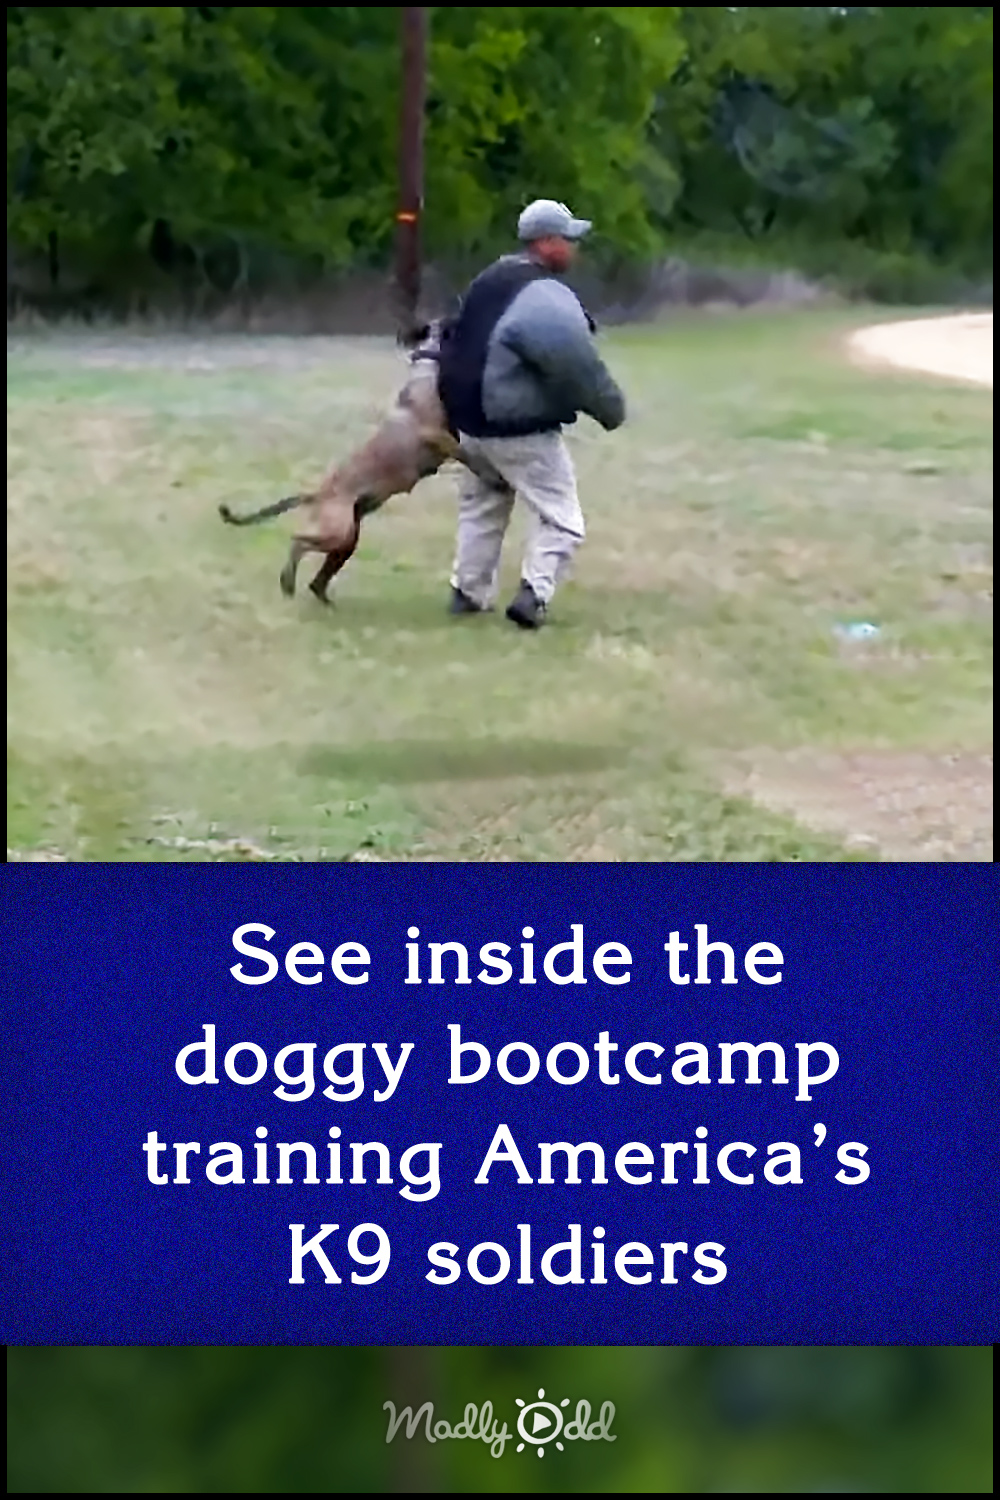 See inside the doggy bootcamp training America’s K9 soldiers